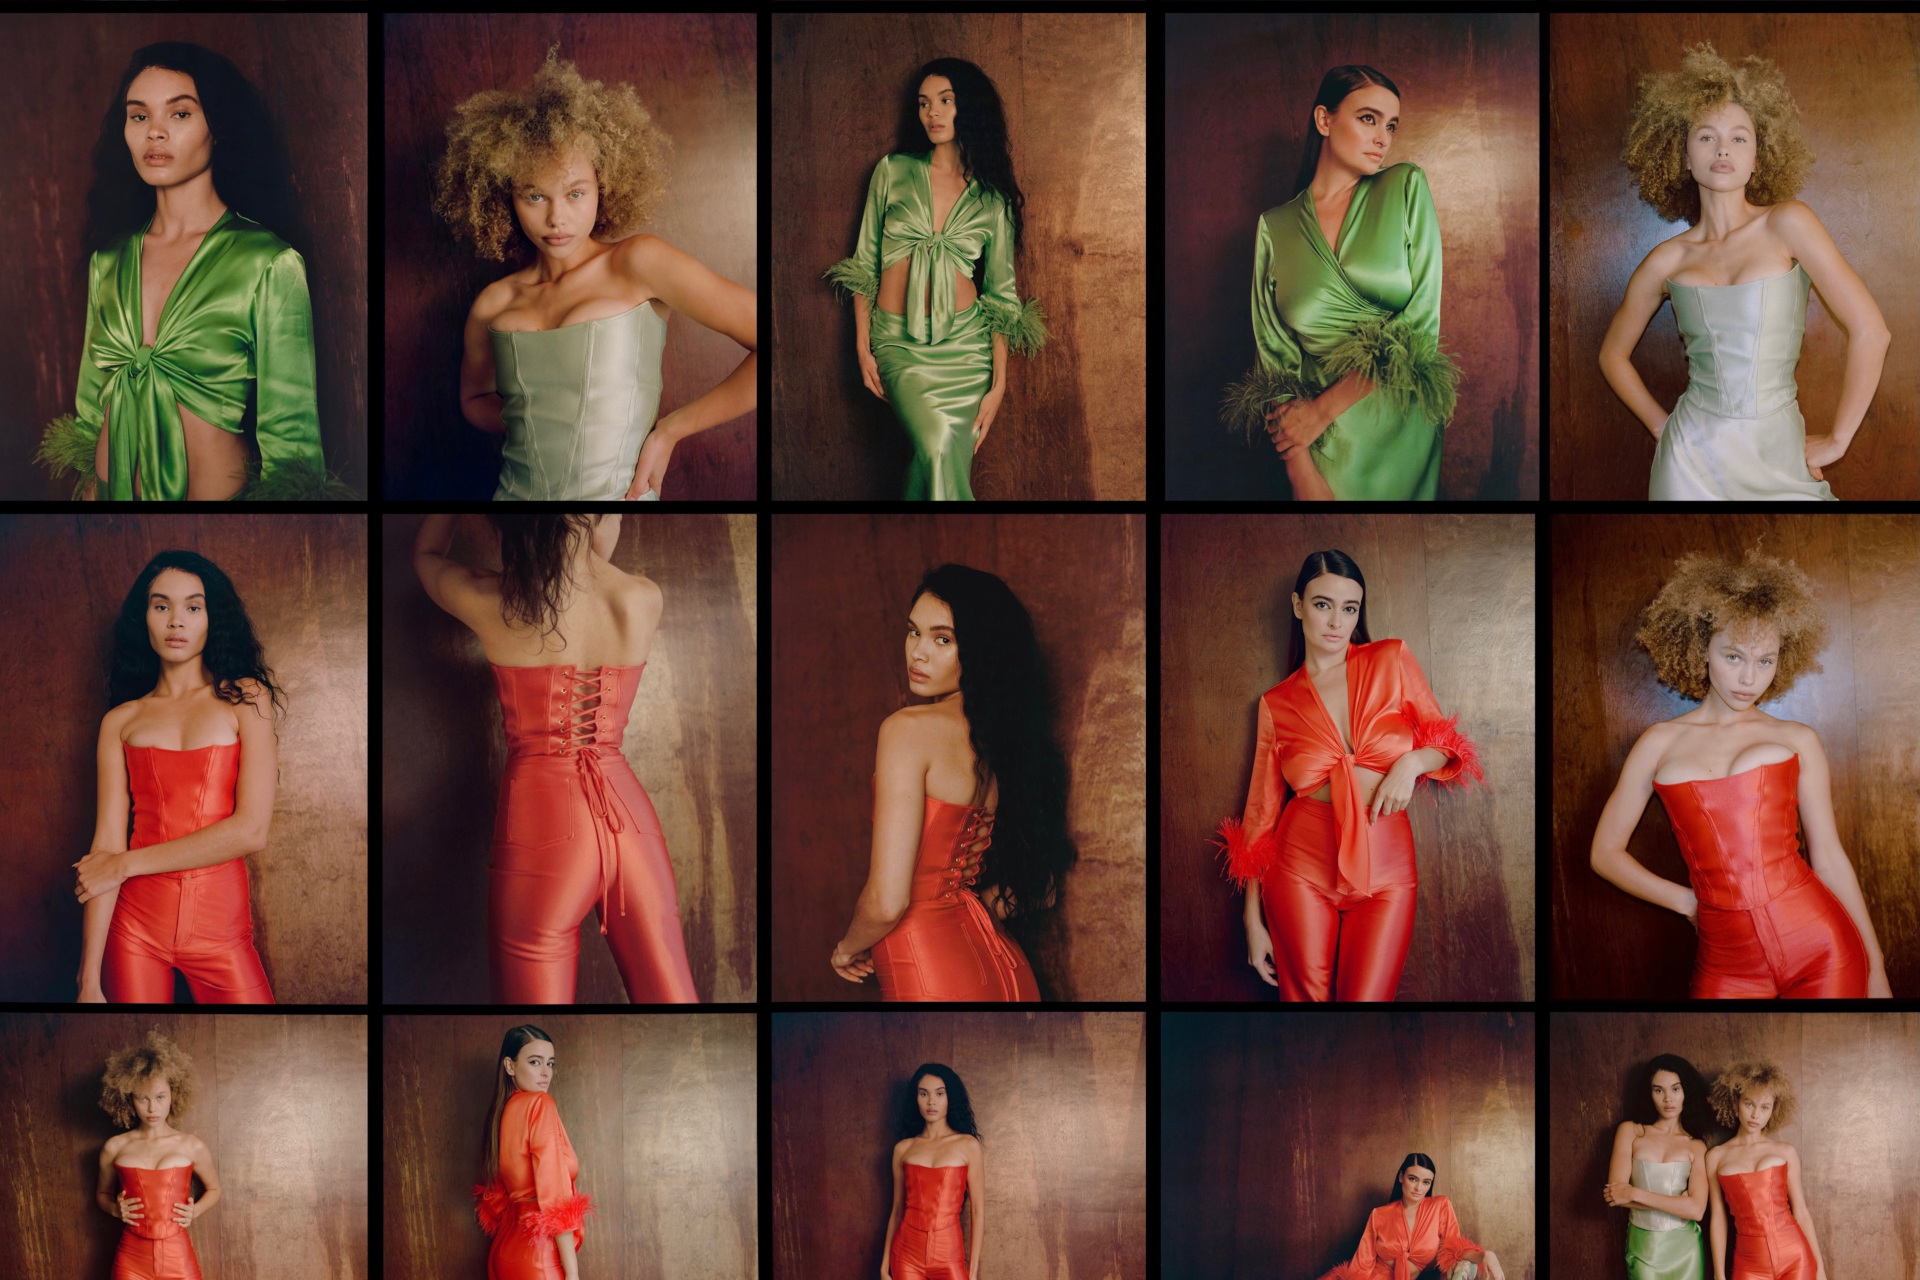 Shots o models in red and green satin clothing